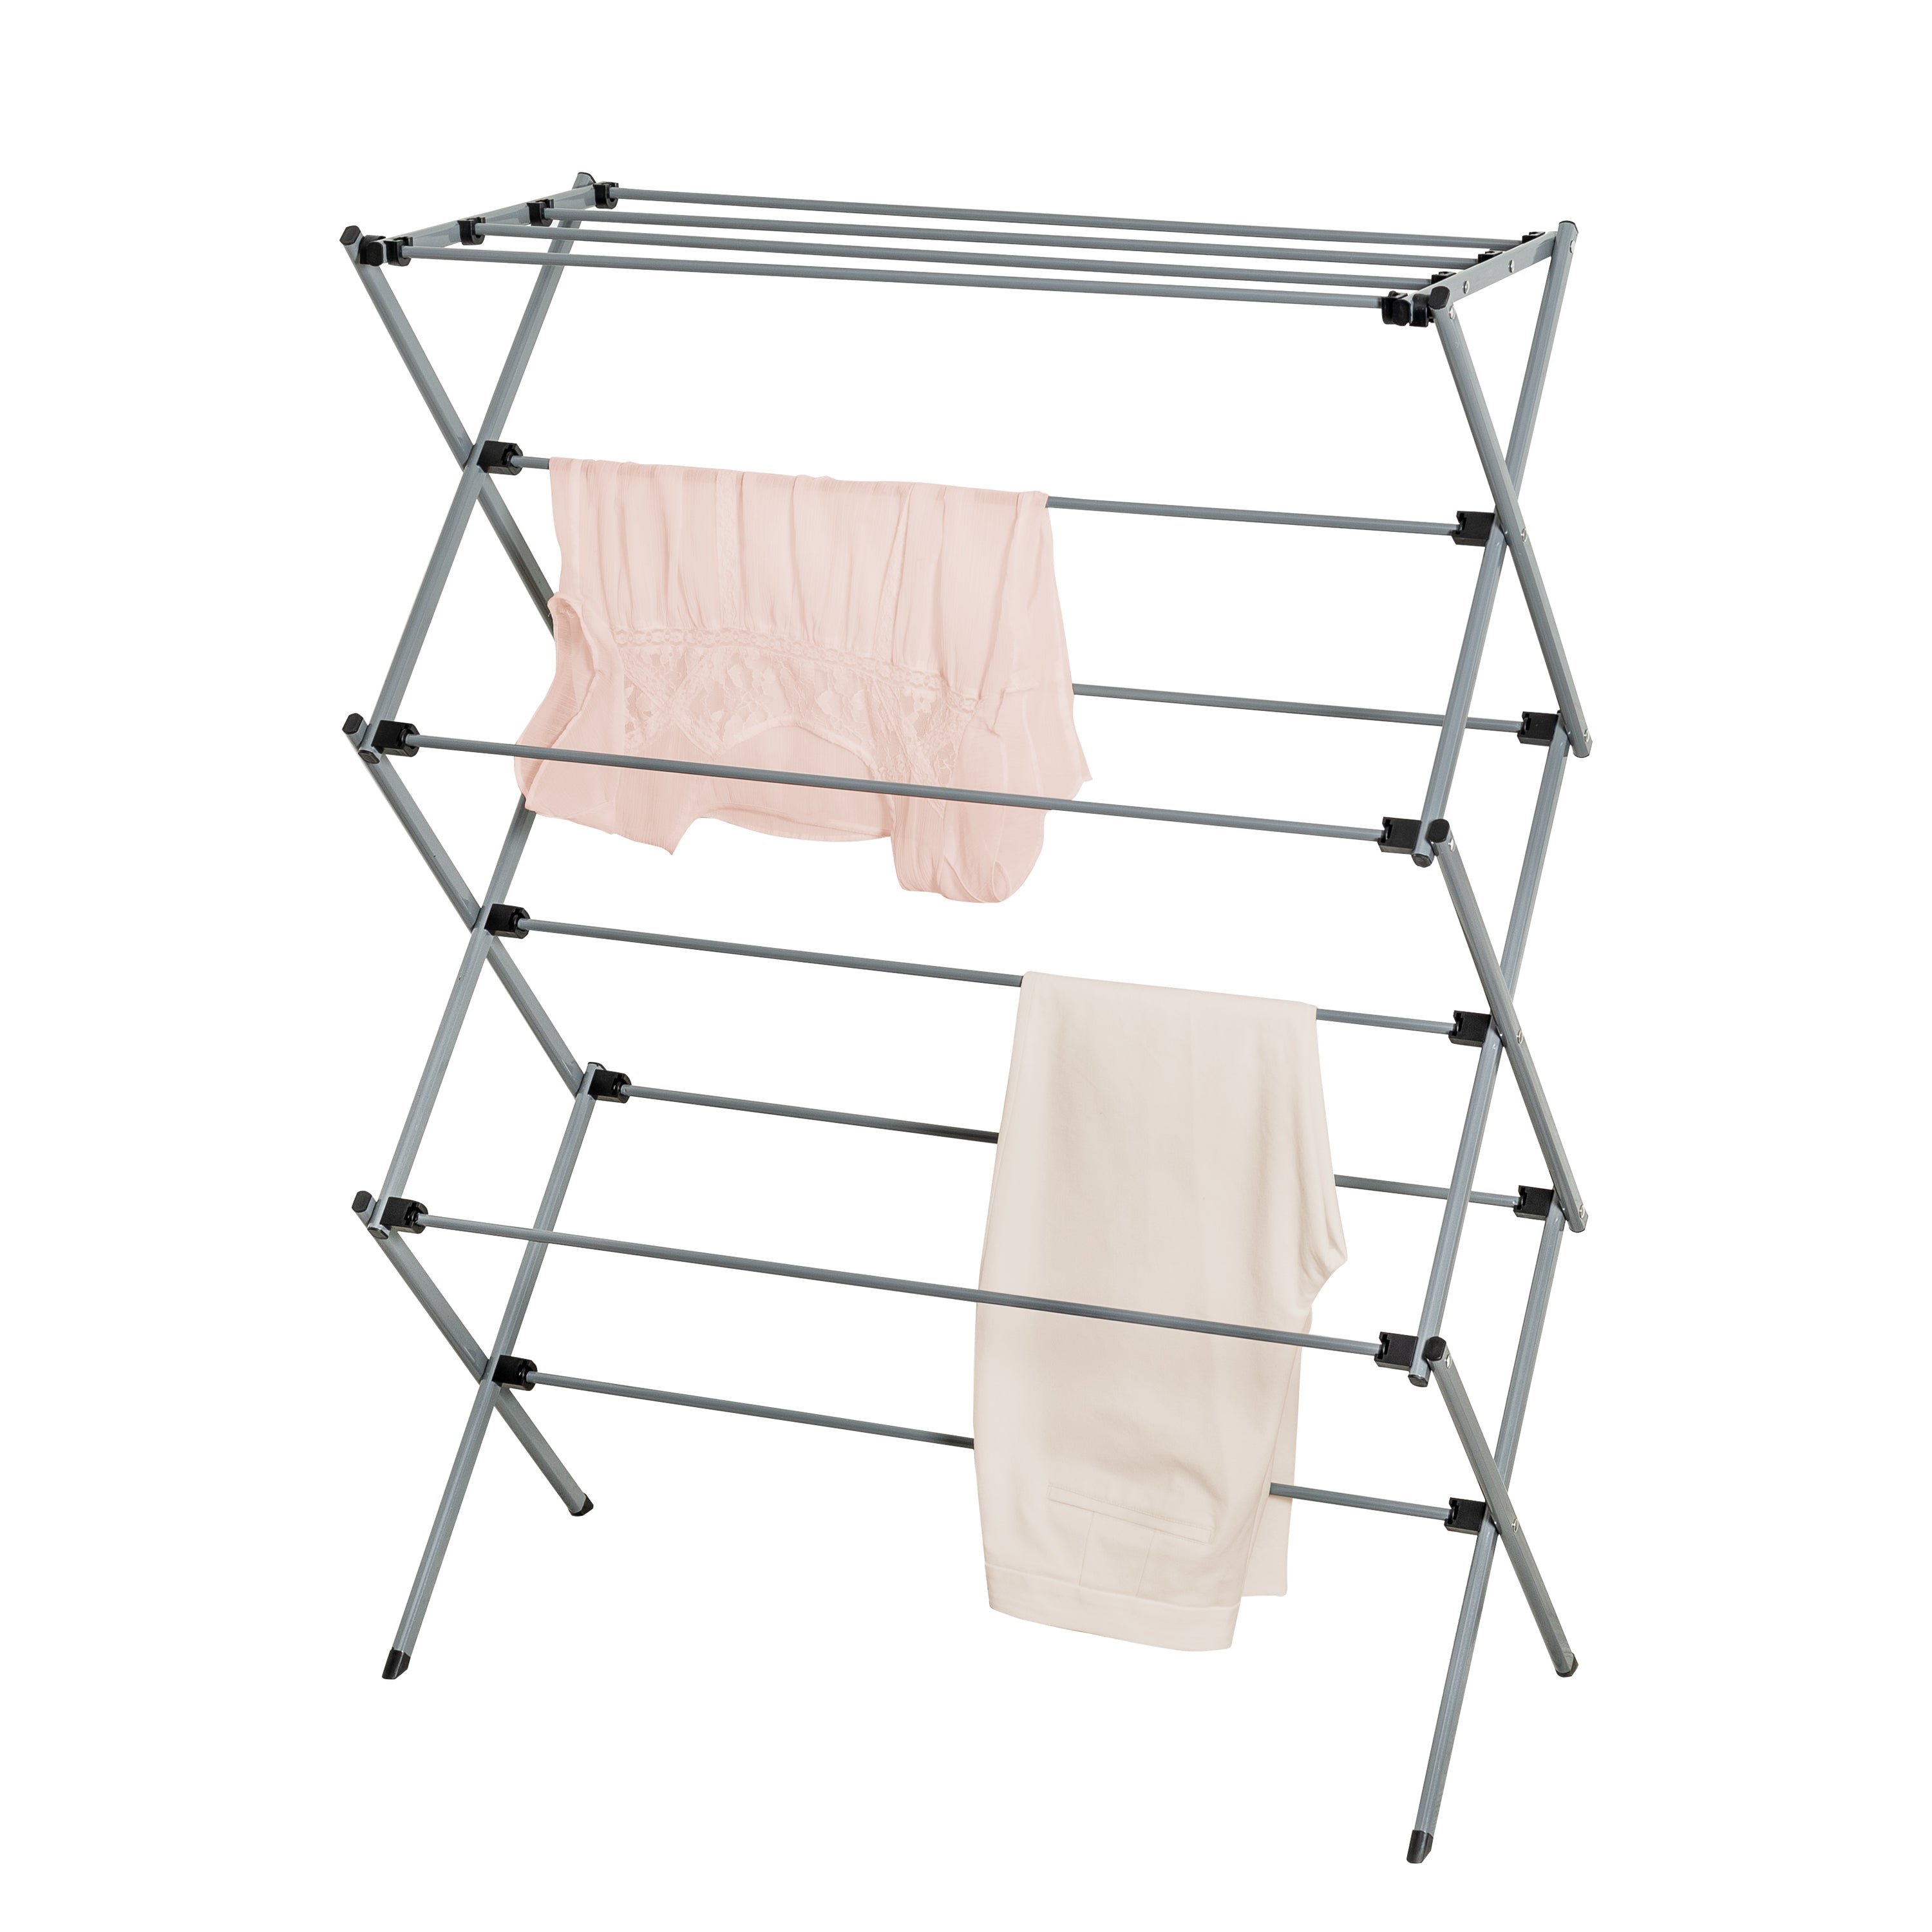 Honey-Can-Do DRY-03053 Expandable Steel Drying Rack, Chrome